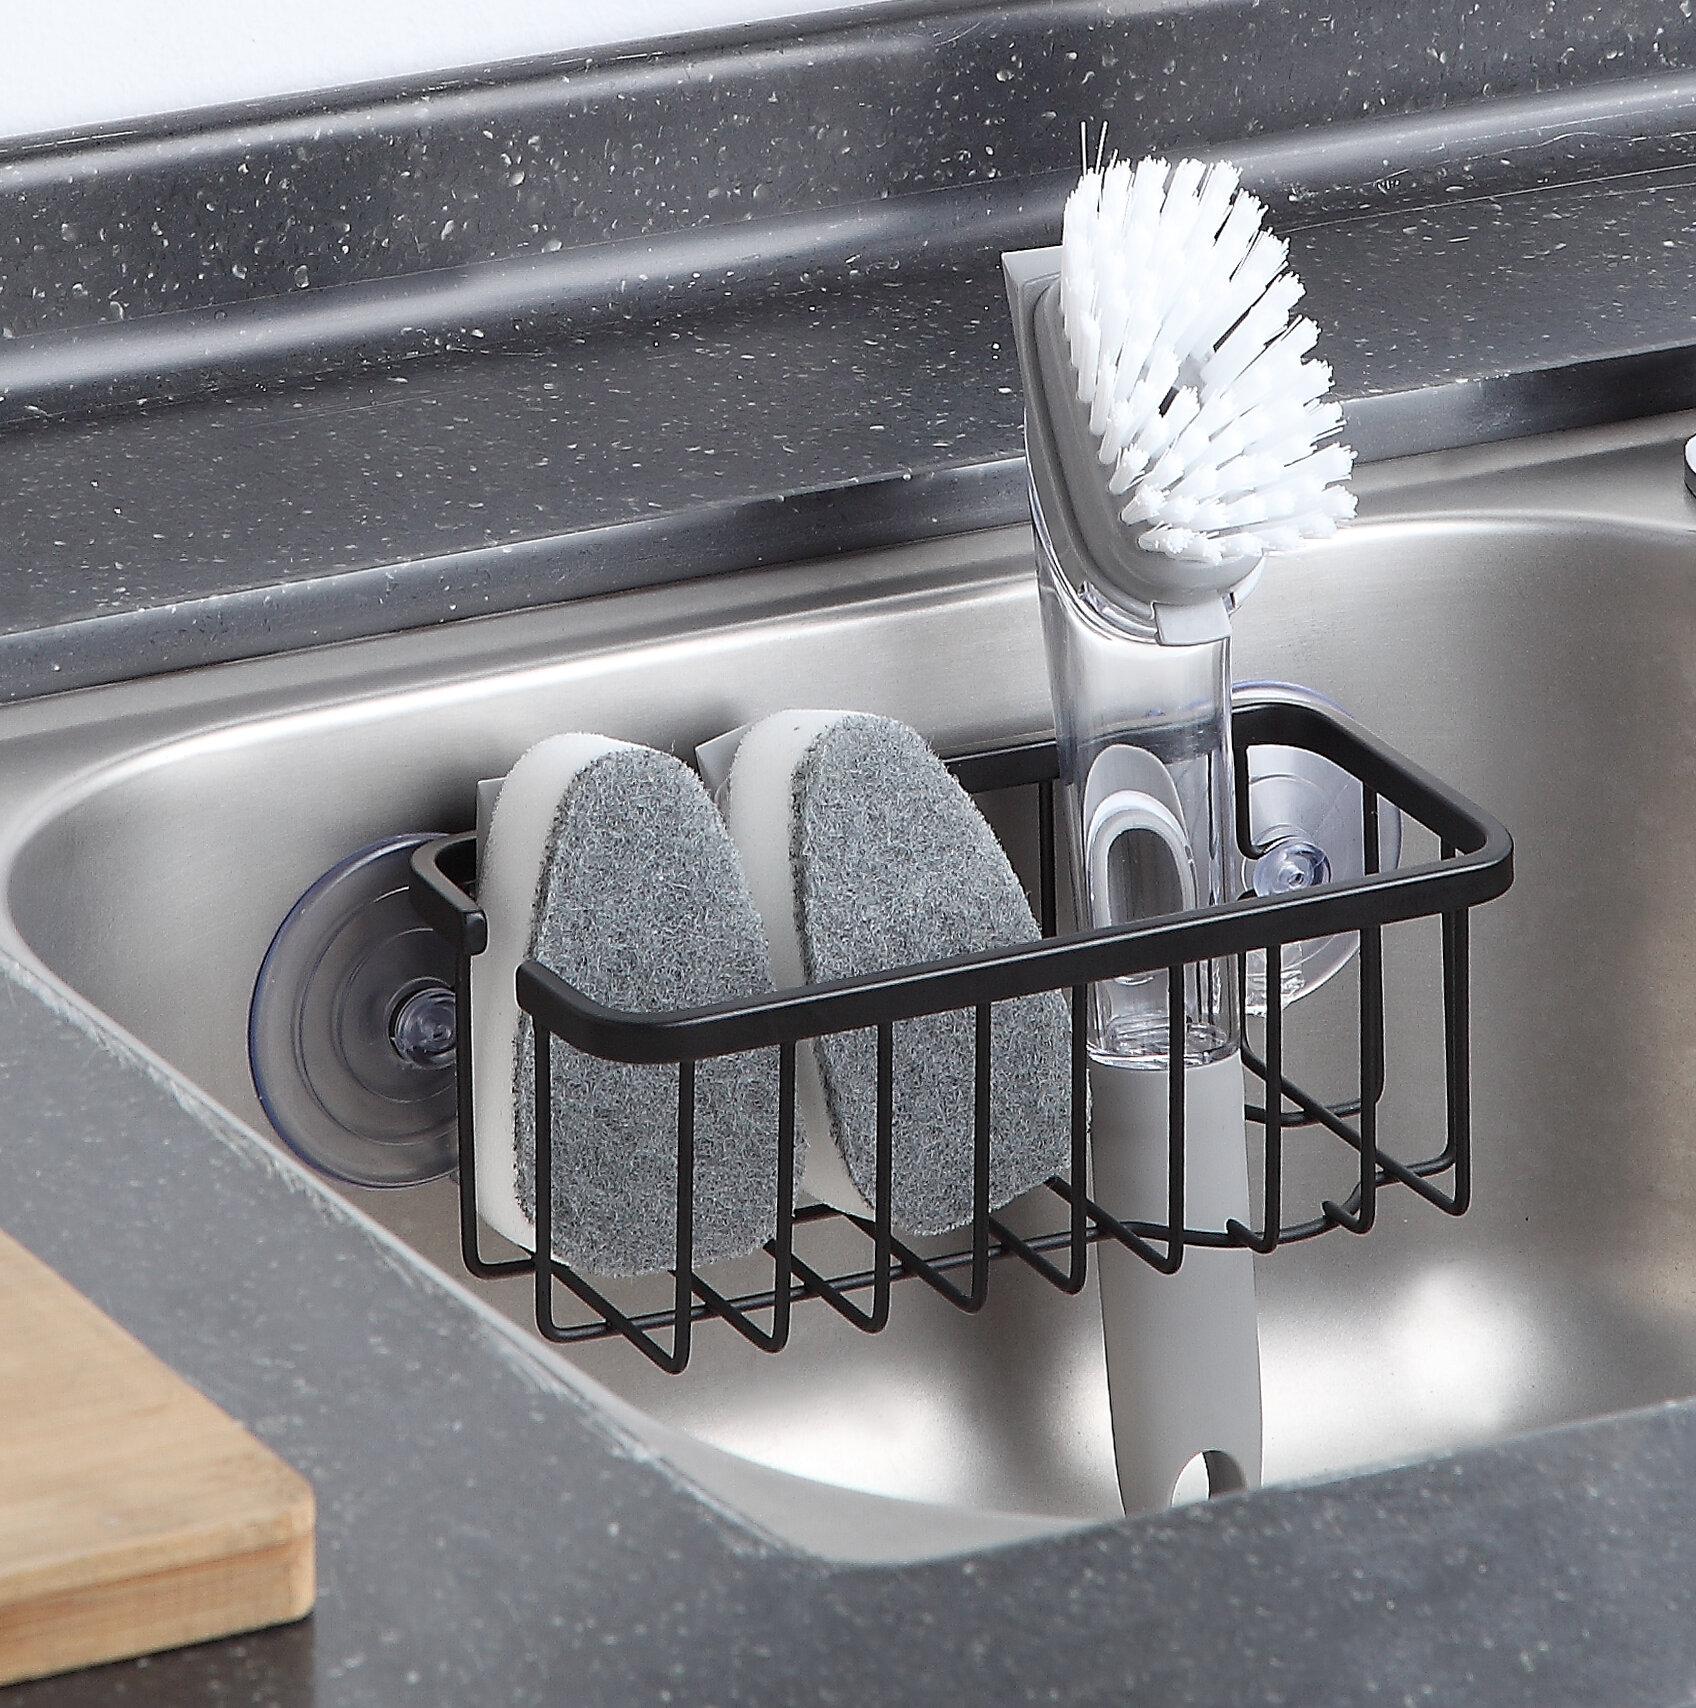 Soap Update Version Scrubbers Kitchen Sink Suction Holder for Sponges 